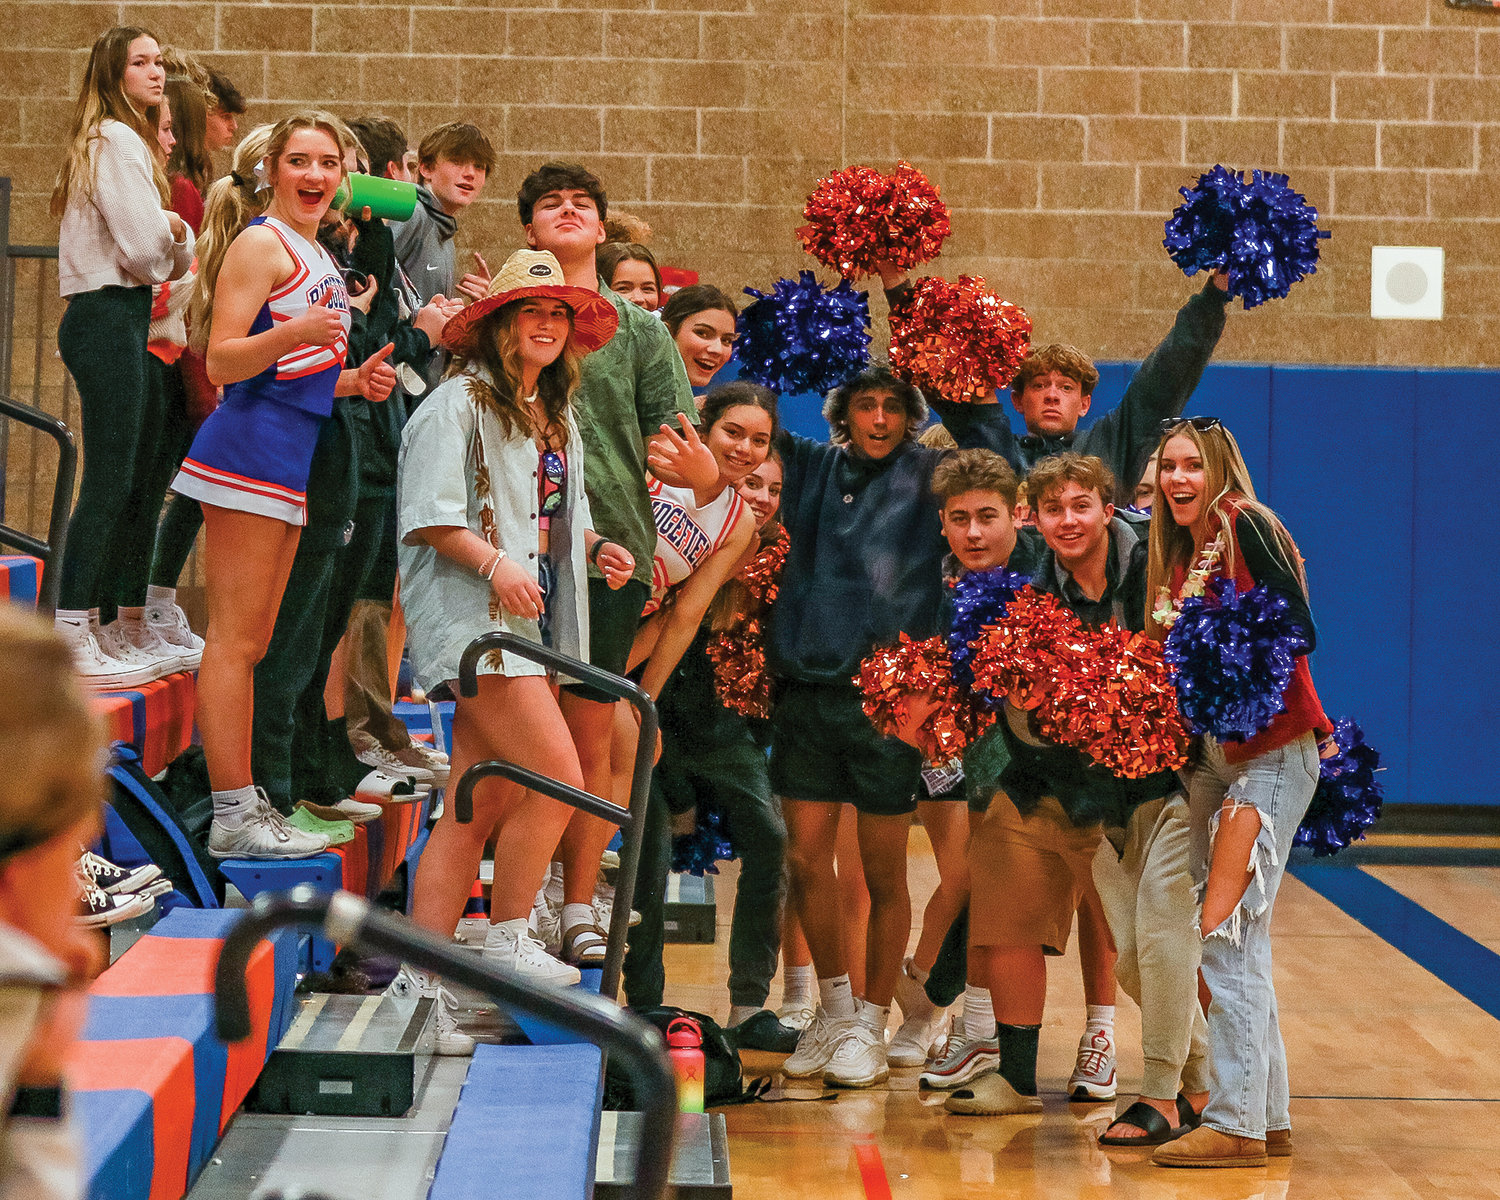 The Ridgefield student section swapped roles with the cheerleaders during a game against La Center on Monday, Dec. 19.